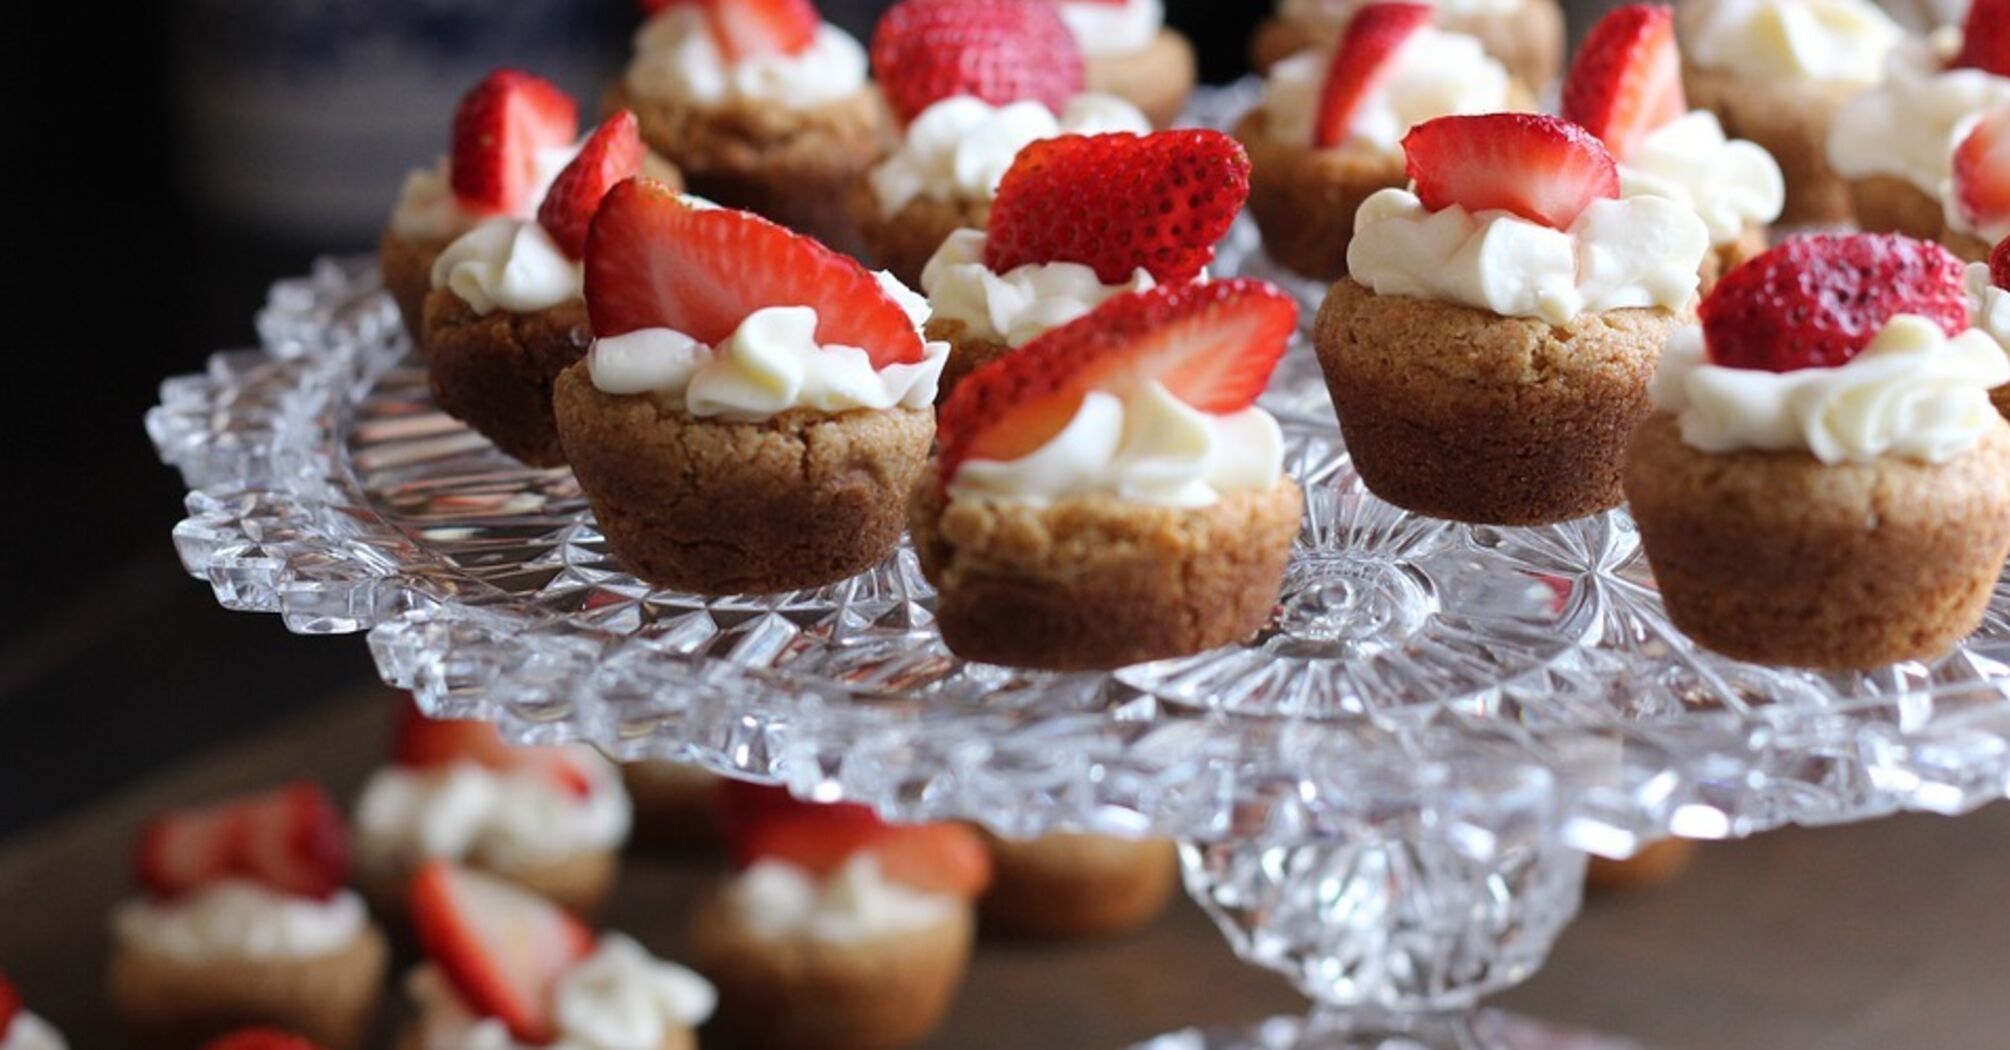 What to make with strawberries besides jam: a simple dessert idea